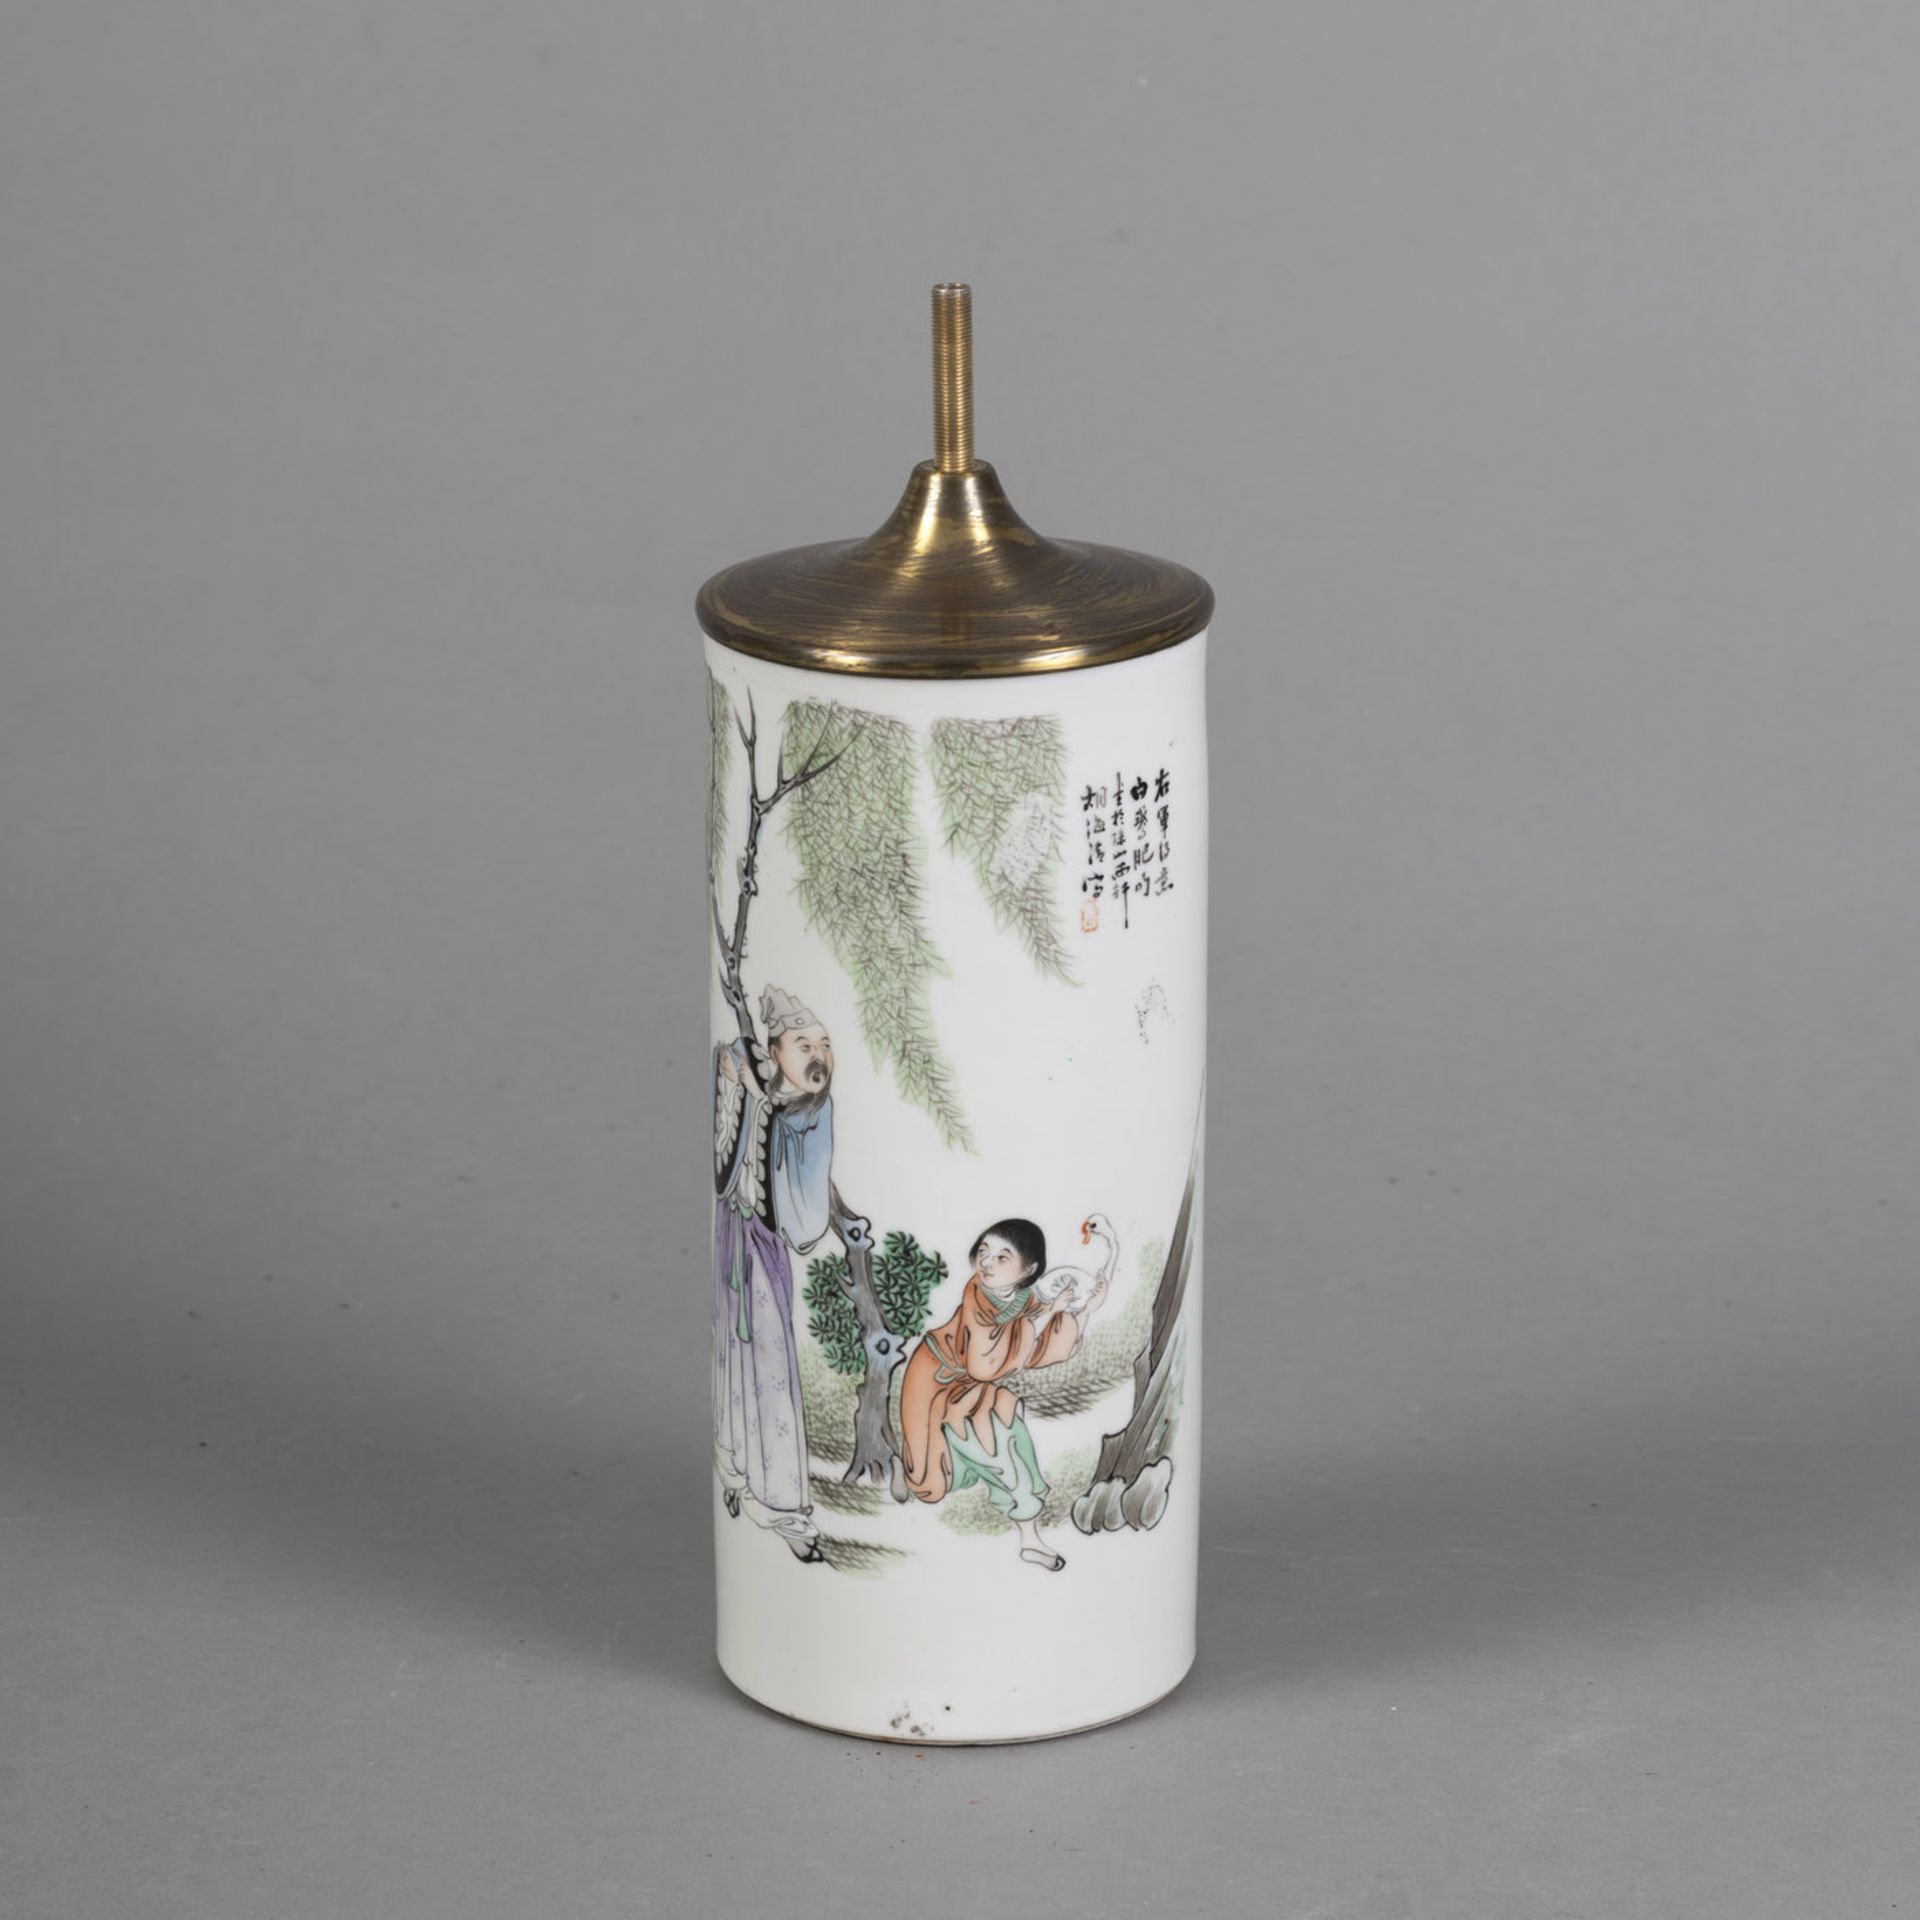 A CYLINDRICAL POLYCHROME PAINTED PORCELAIN HAT STAND DEPICTING 'WANG XIZHI AND HIS GOOSE'